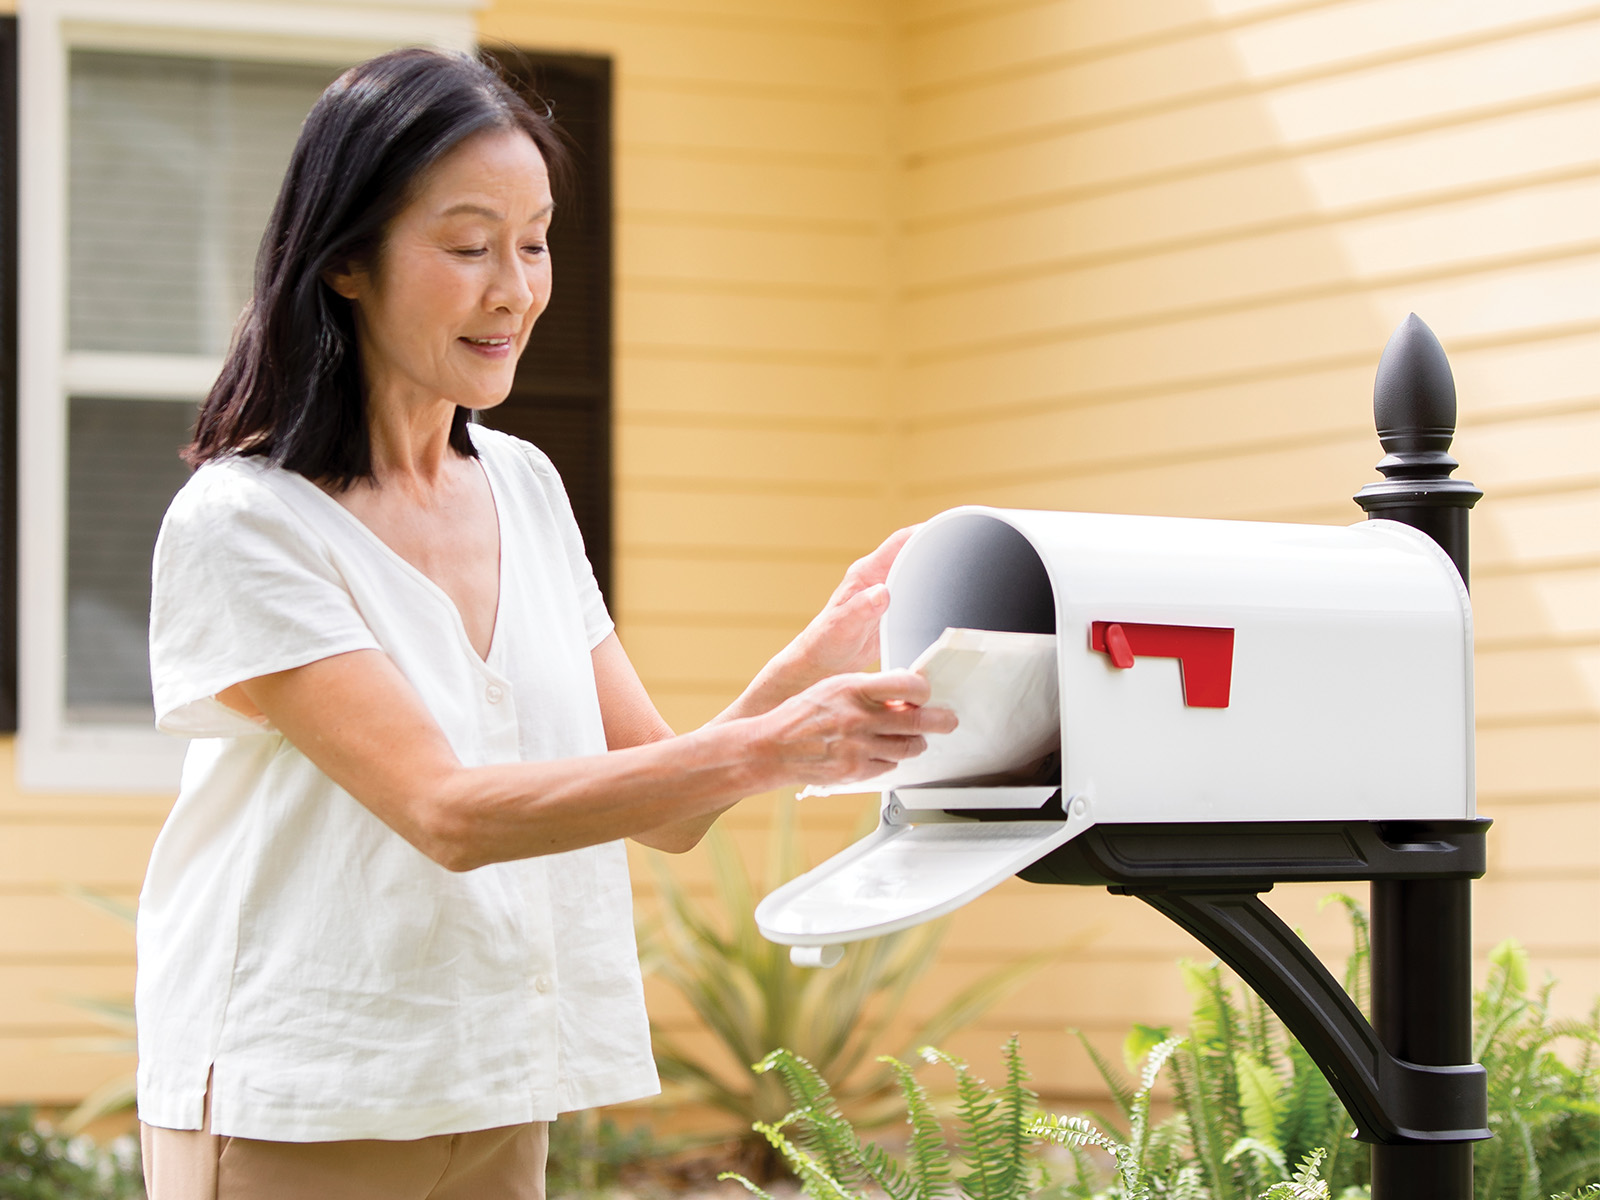 Woman removing mail from her mailbox